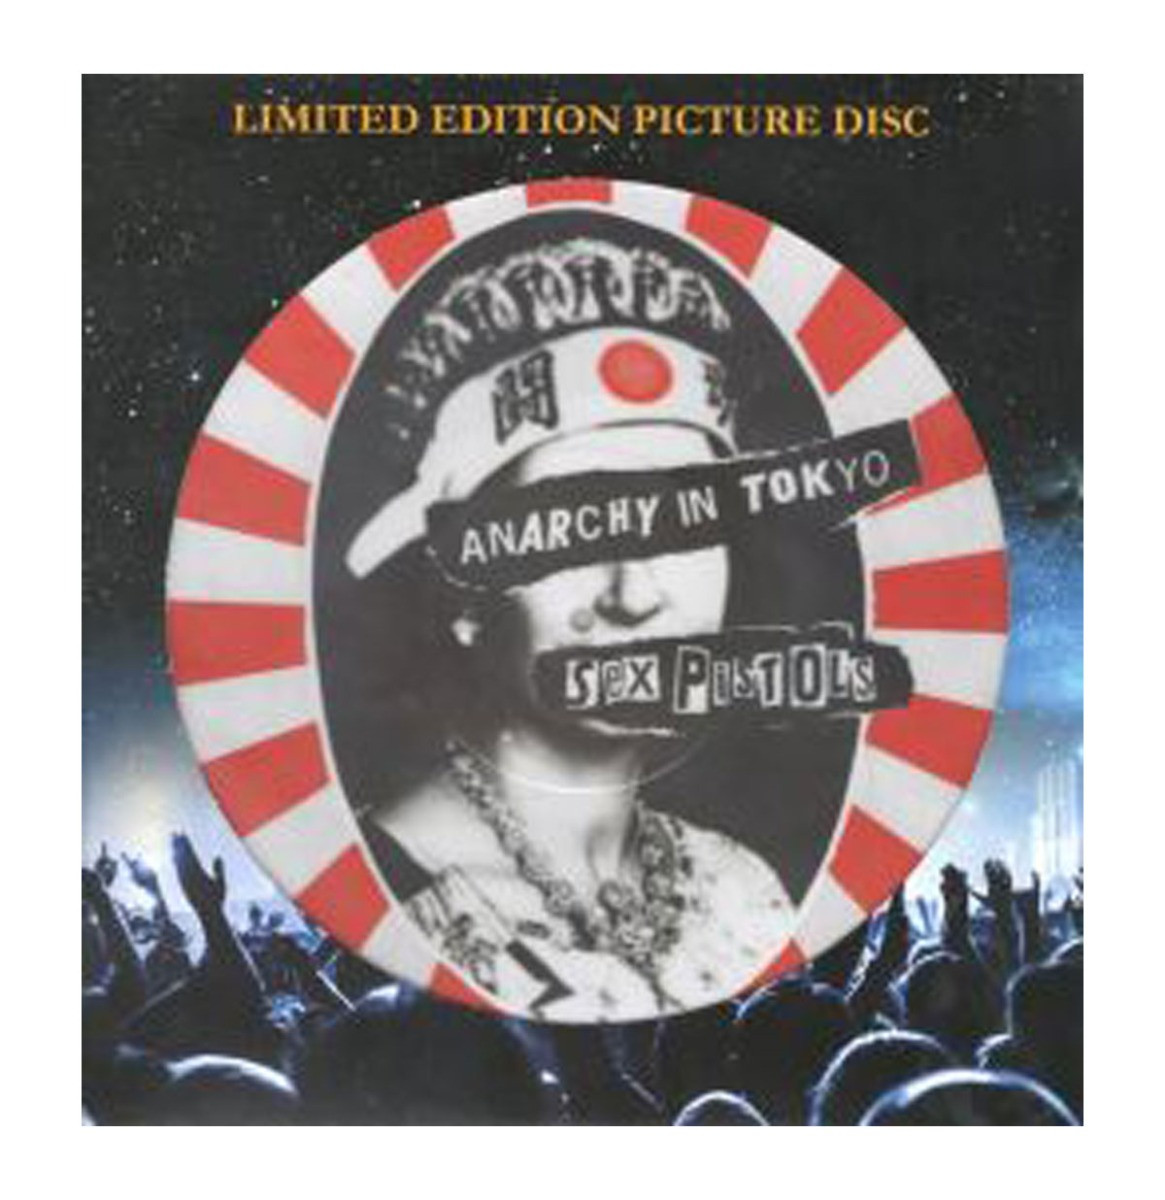 Sex Pistols - Anarchy In Tokyo (Picture Disc) (Limited Edition) LP